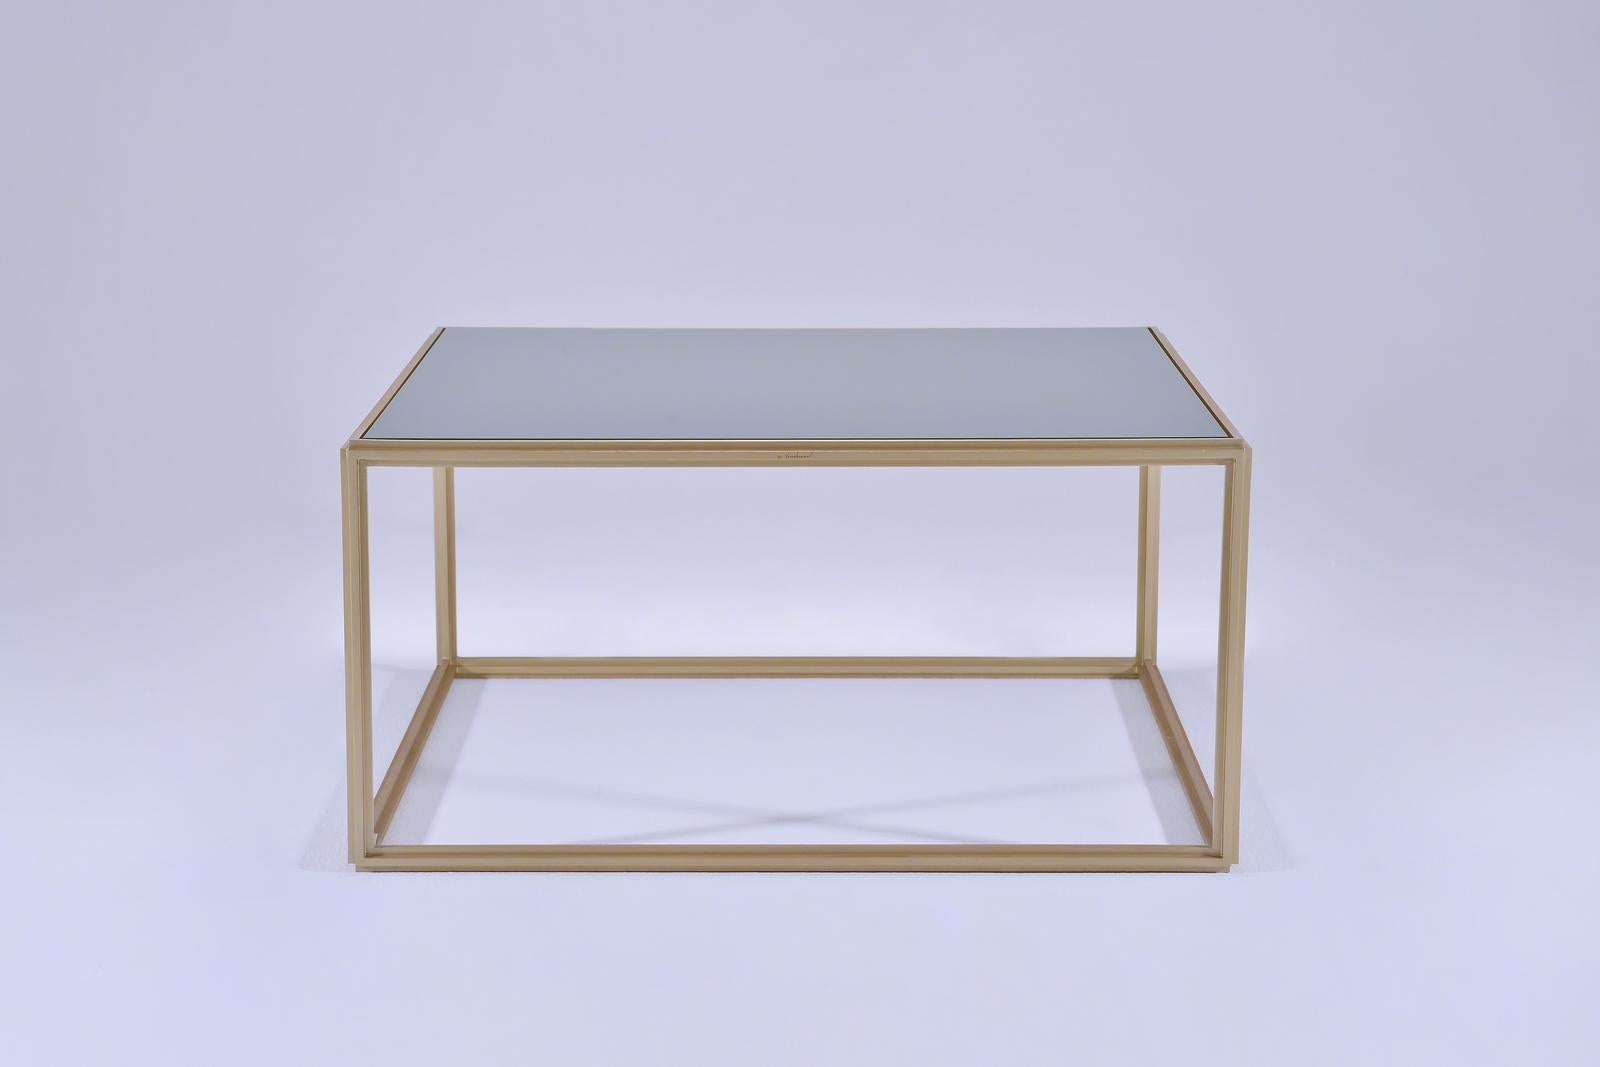 We love this play of contrasts in this version of our PT6 Brass Low Table with an emerald green top glass top. 

Inspired by the modernists we created this cubist table in extruded brushed brass and hand-welded profiles. We created this one for a